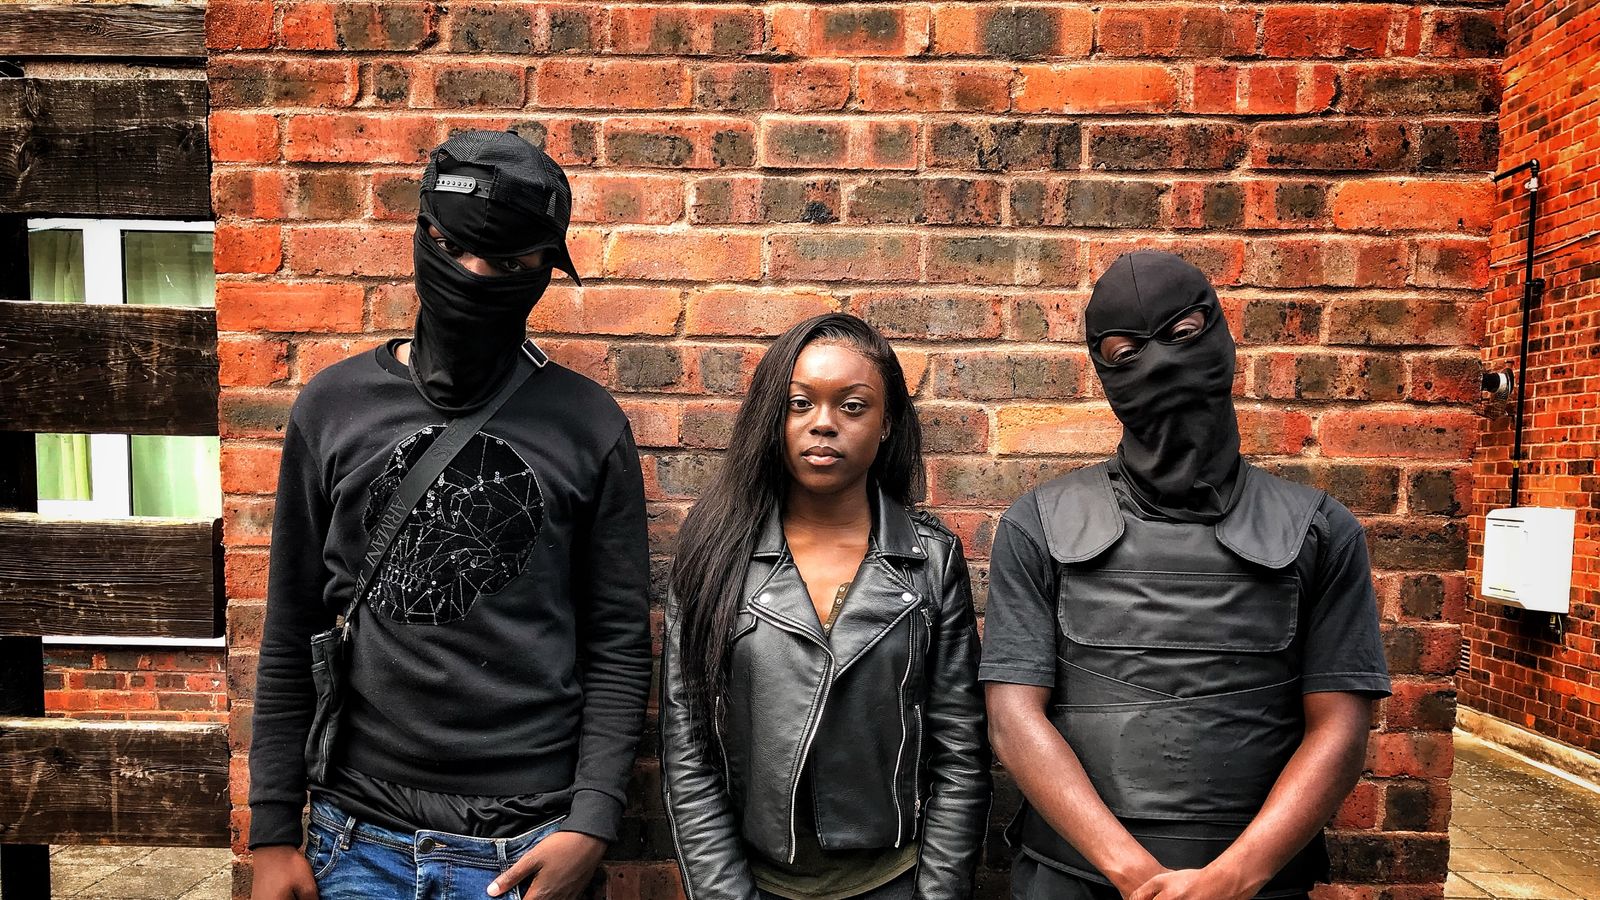 Line 18: Face to face investigating London's 'gang life', UK News